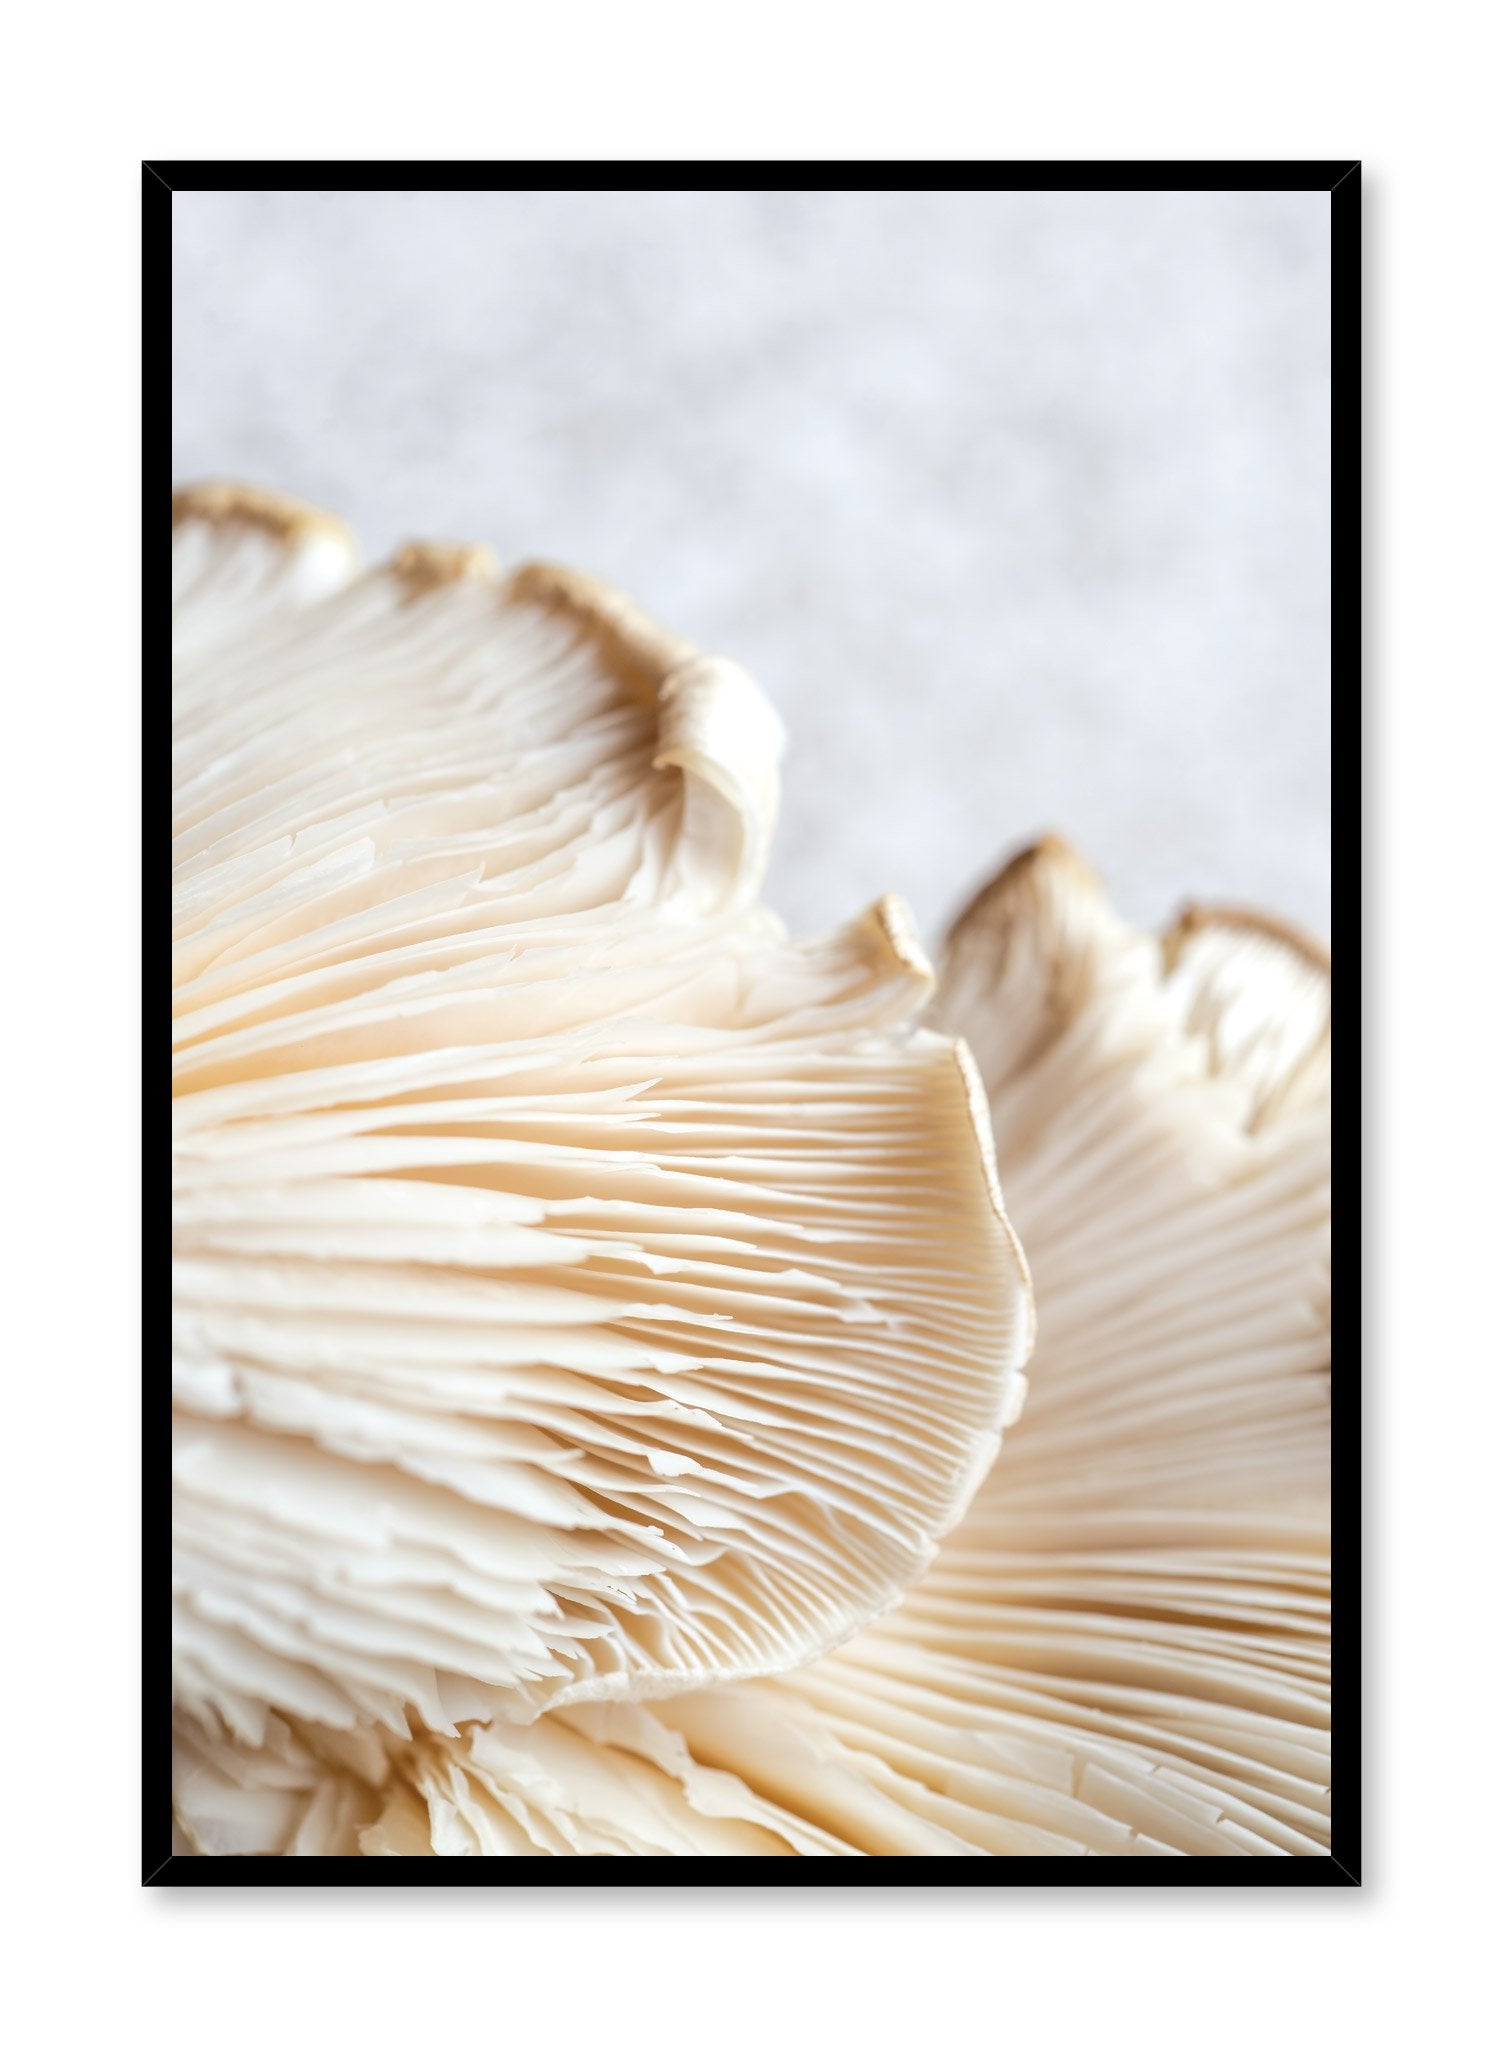 Minimalist poster by Opposite Wall with Mushroom Detail food photography